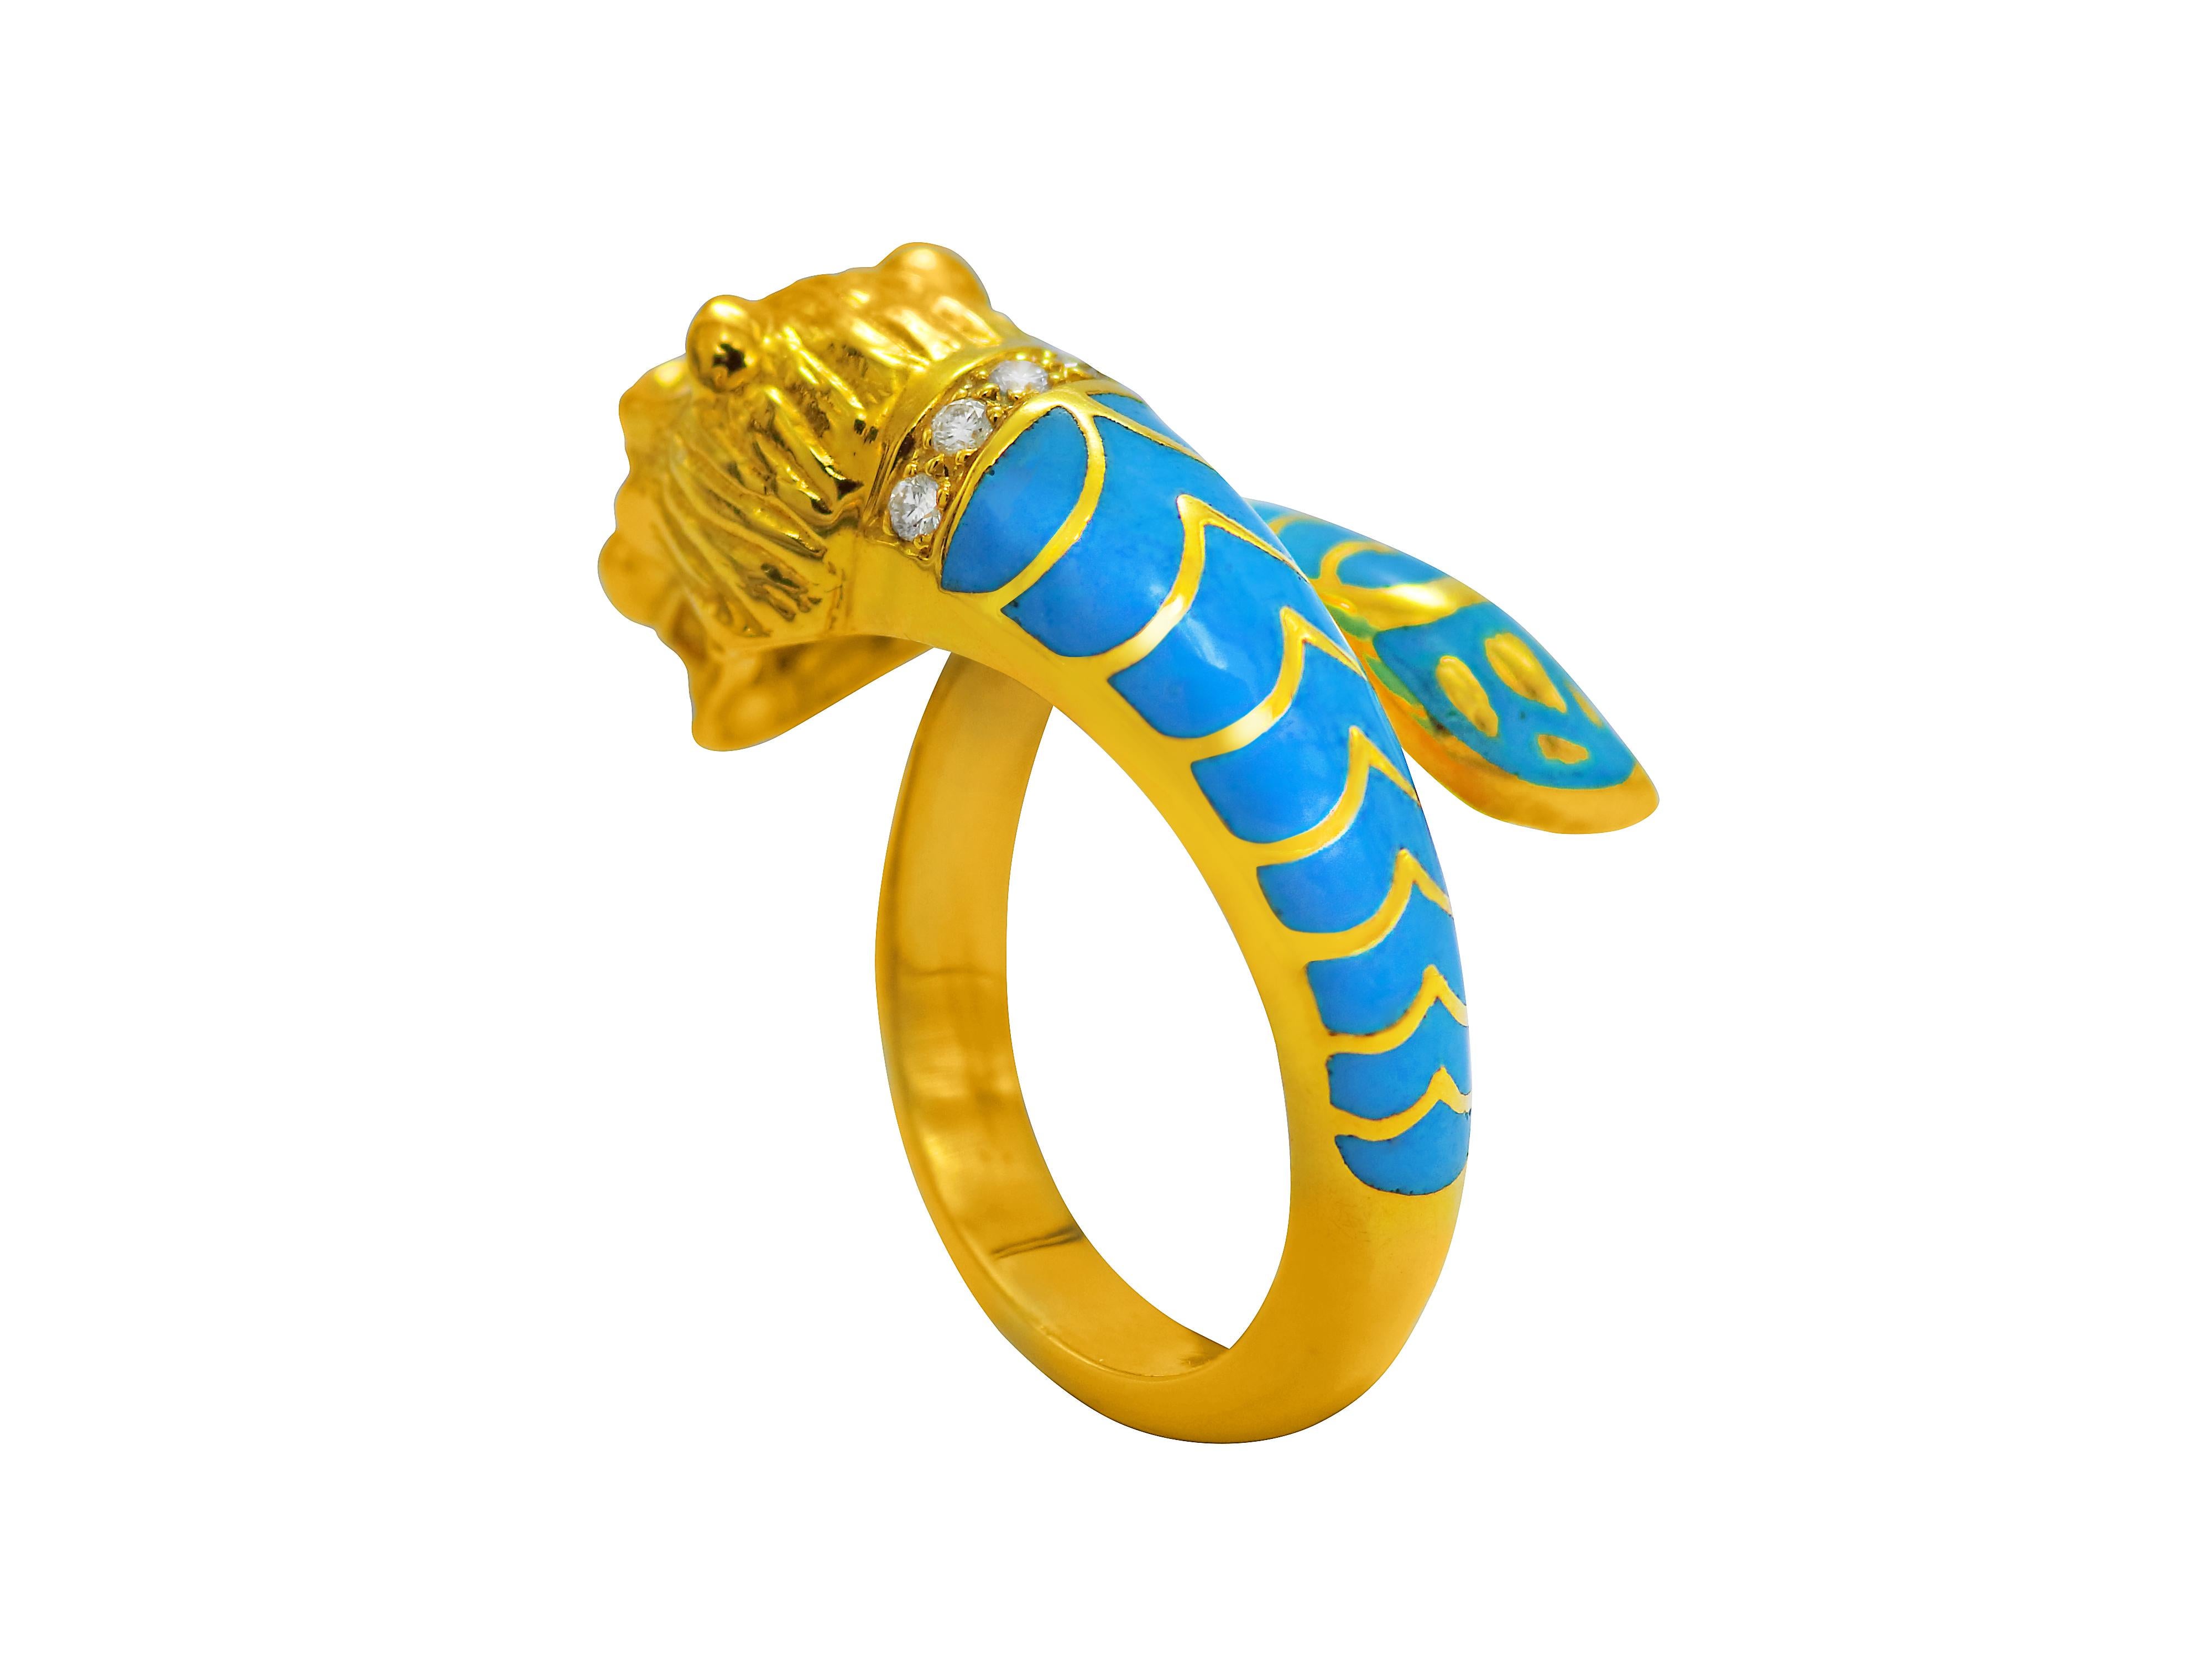 Brilliant Cut Dimos 18k Gold Lion Ring with Rubies and Diamonds